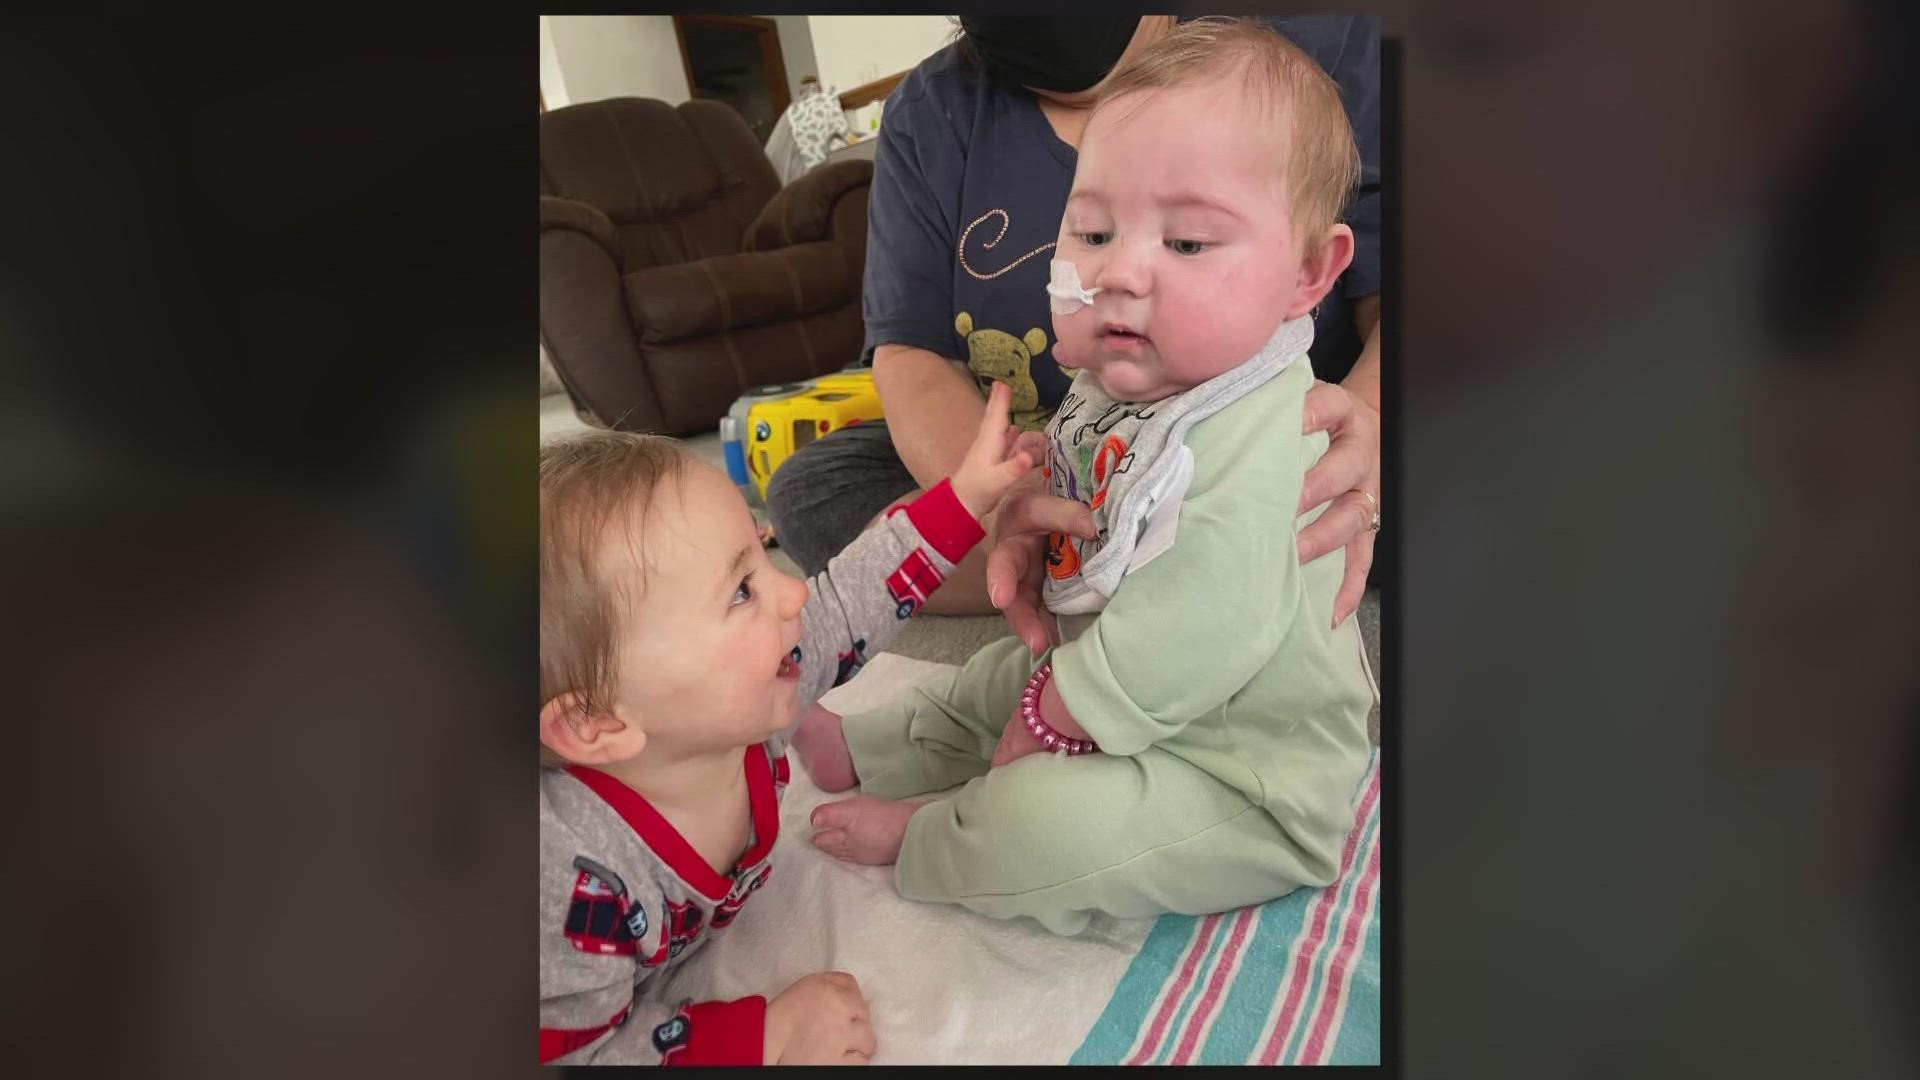 A Metro East 9-month-old was recently given the gift of life after a heart transplant. St. Louis Children's Hospital performed the surgery.